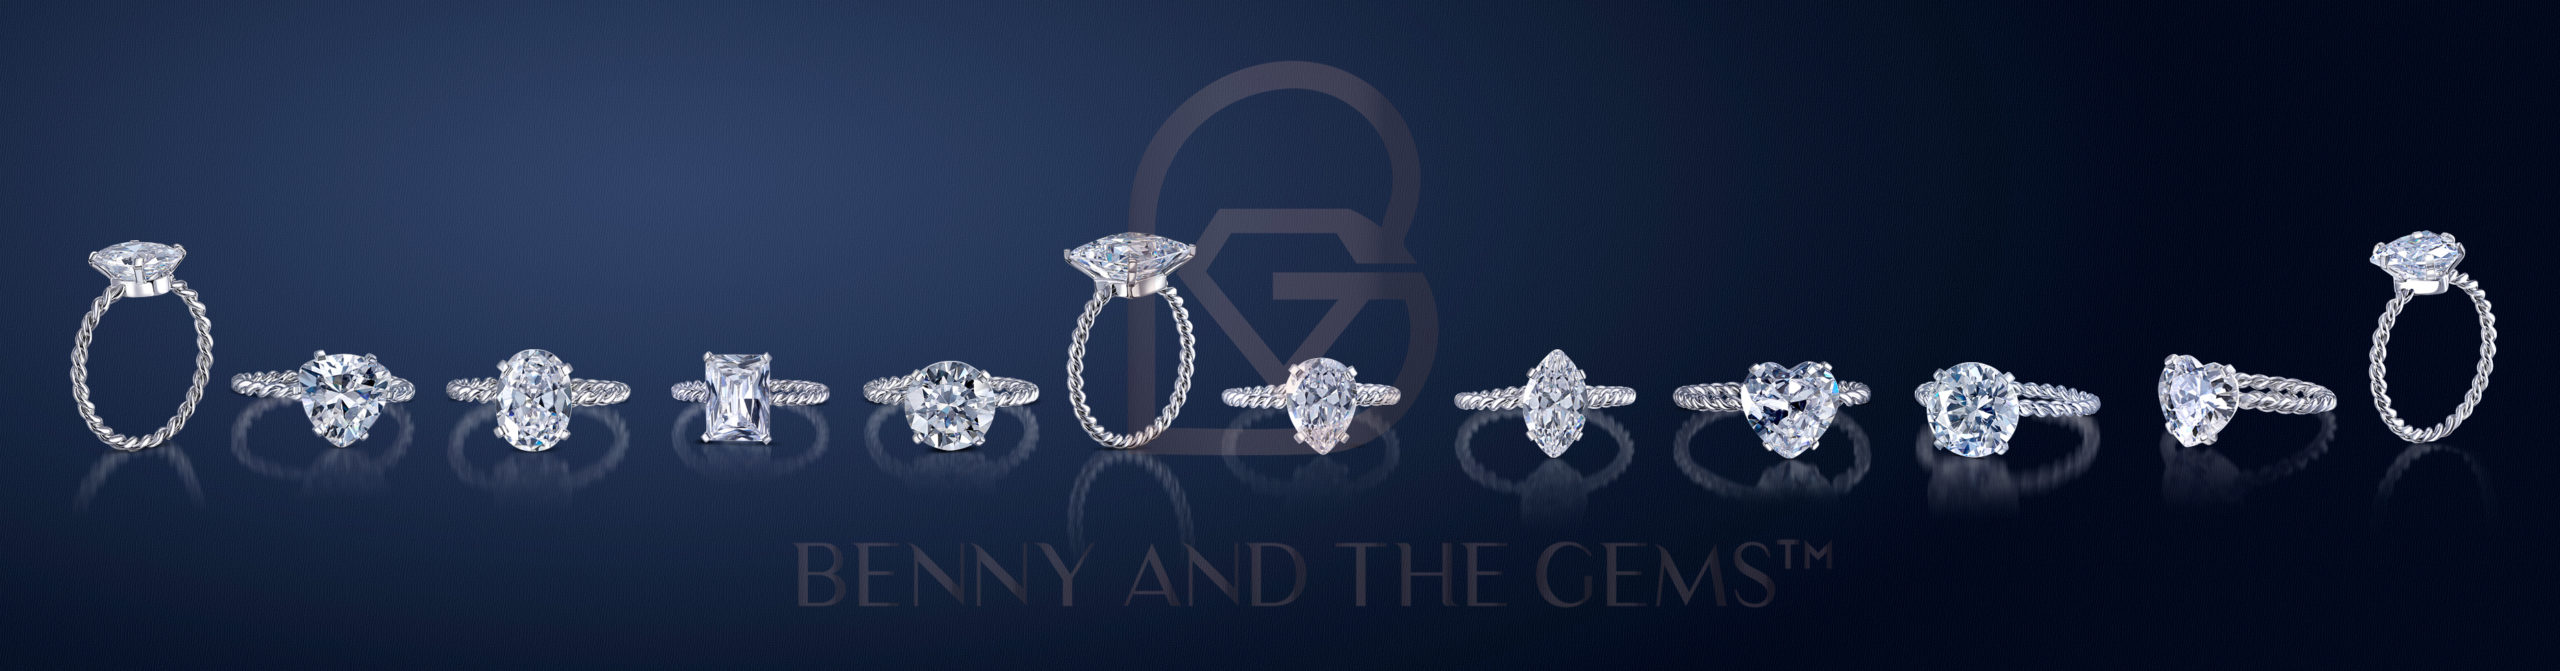 Benny and the gems diamond gift jewelry